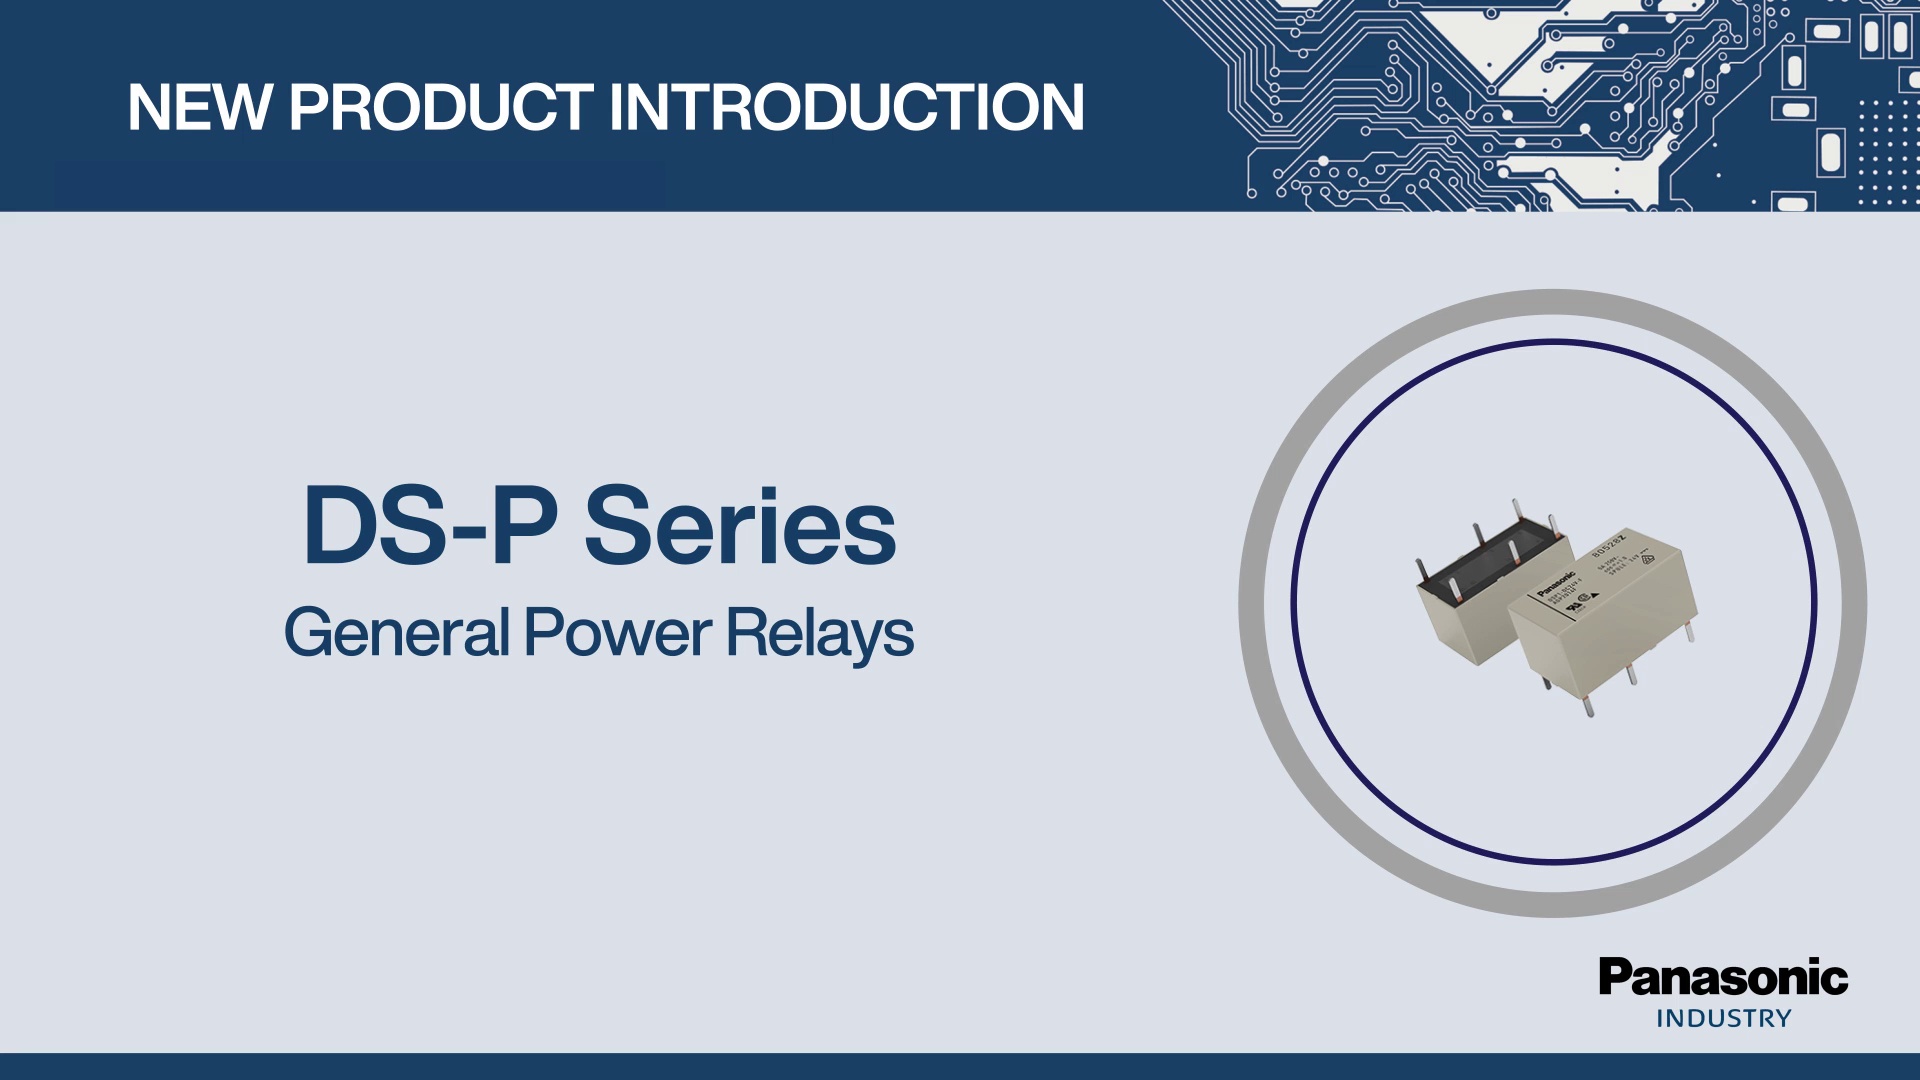 New Product Introduction: DS-P Series